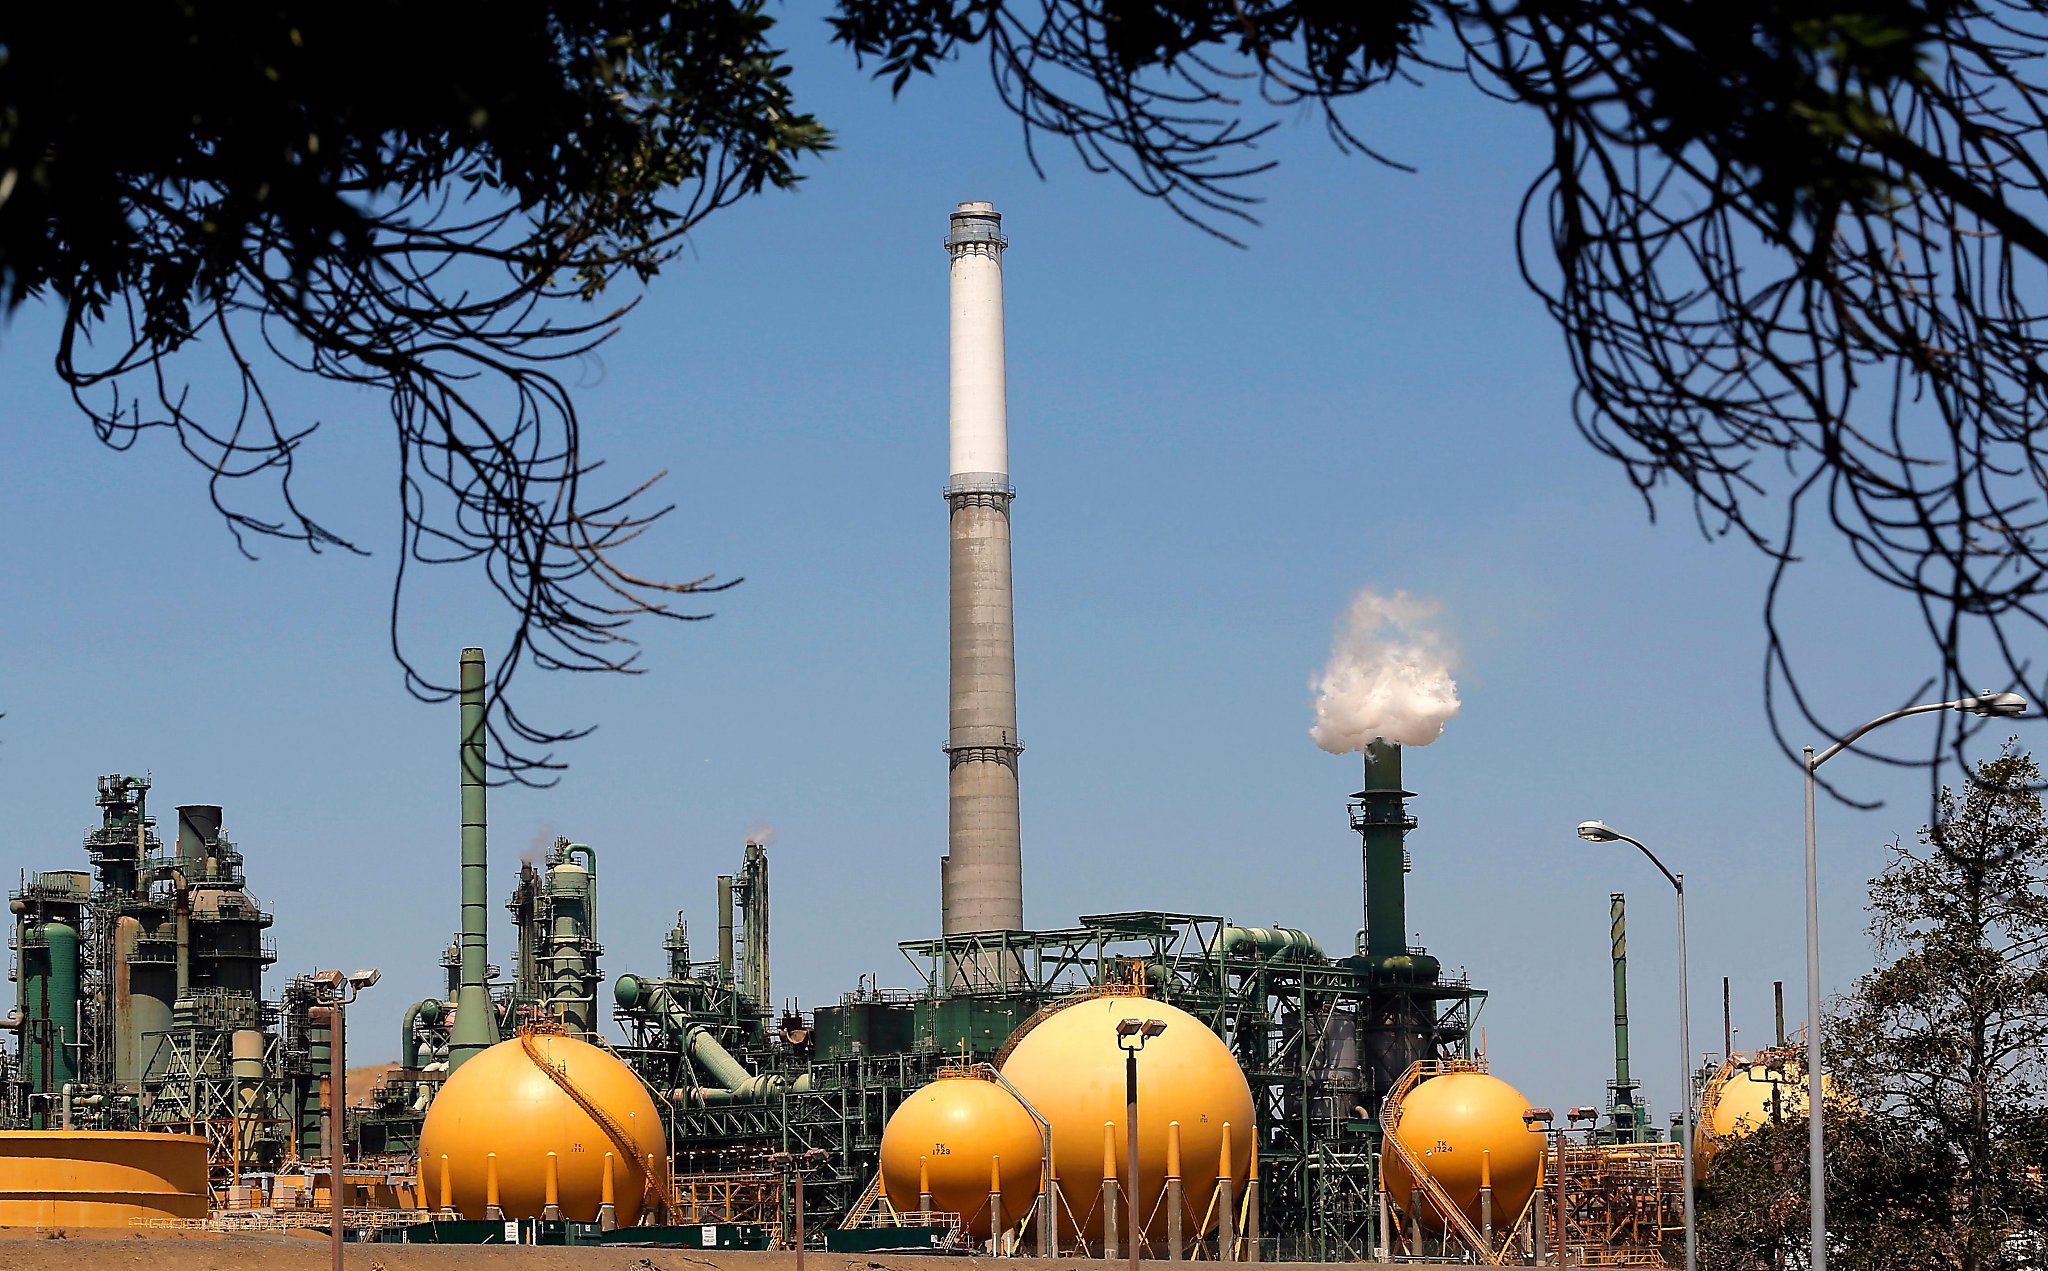 Valero refinery in Benicia temporarily shut down after air pollution warning